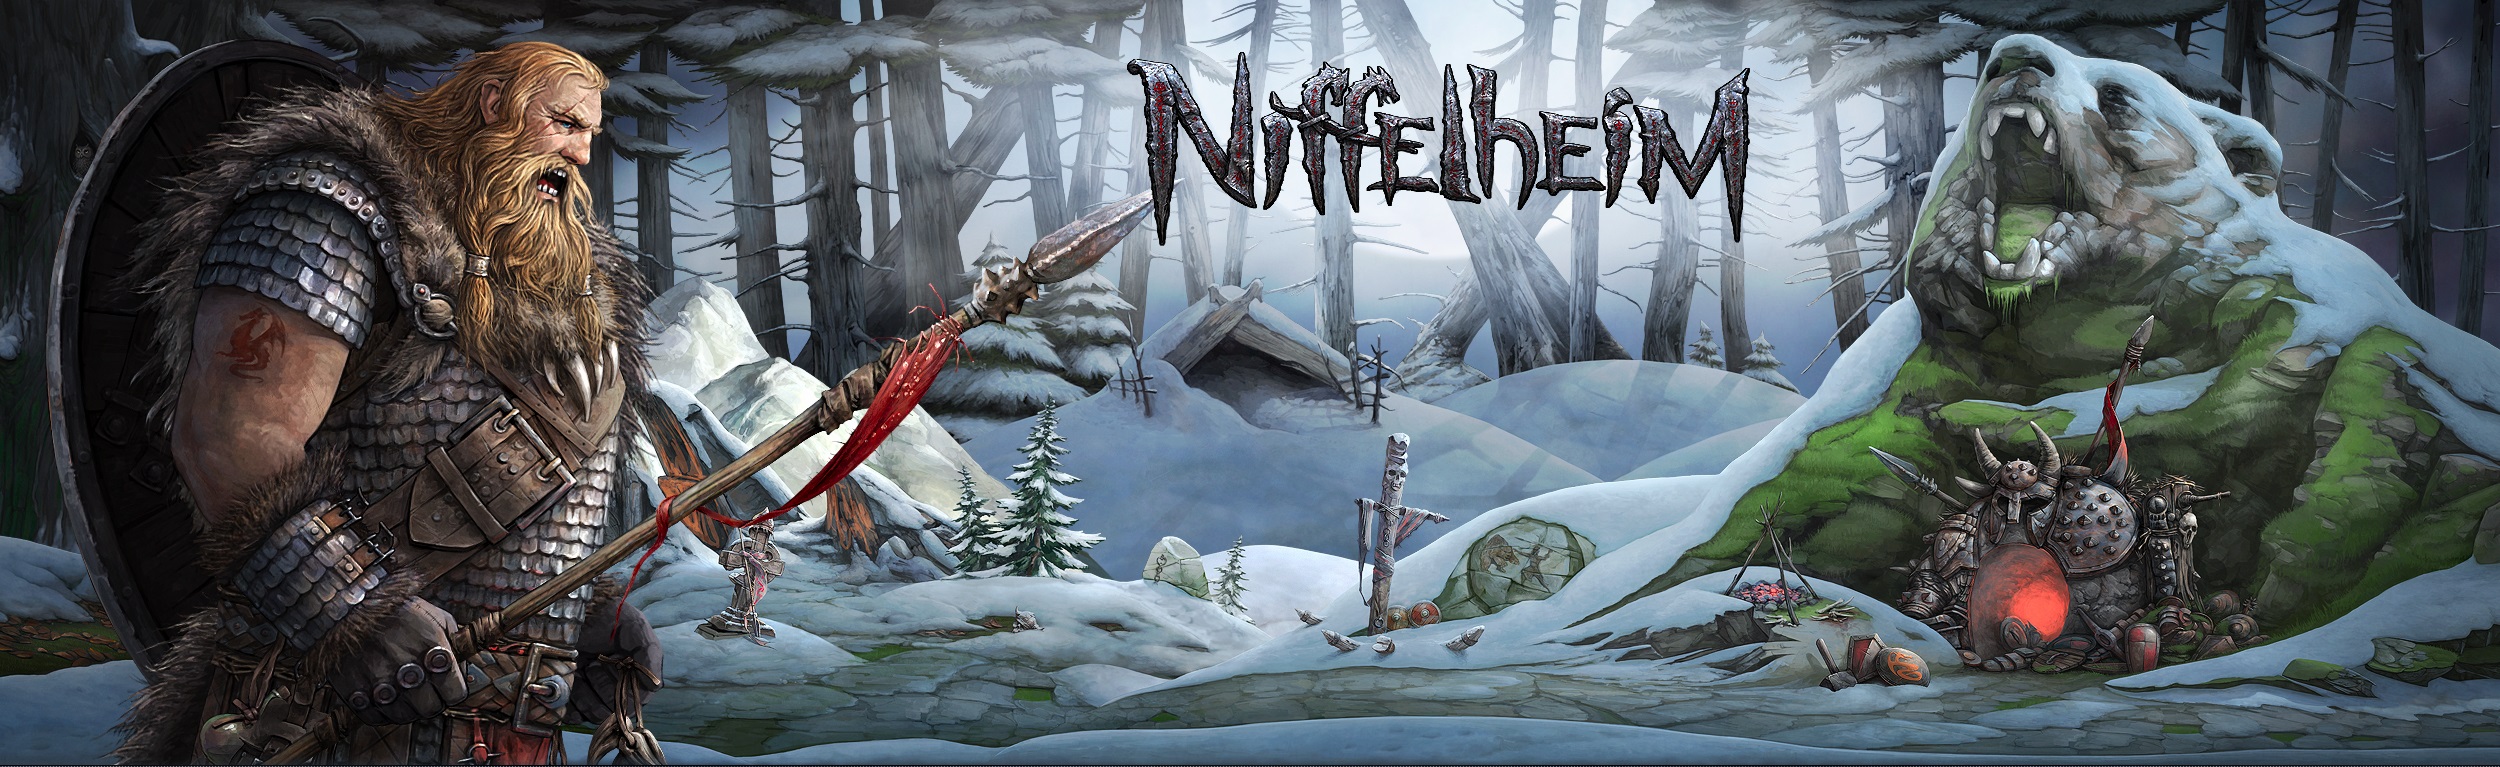 Niffelheim Review for PS4 - أنا ناجٍ